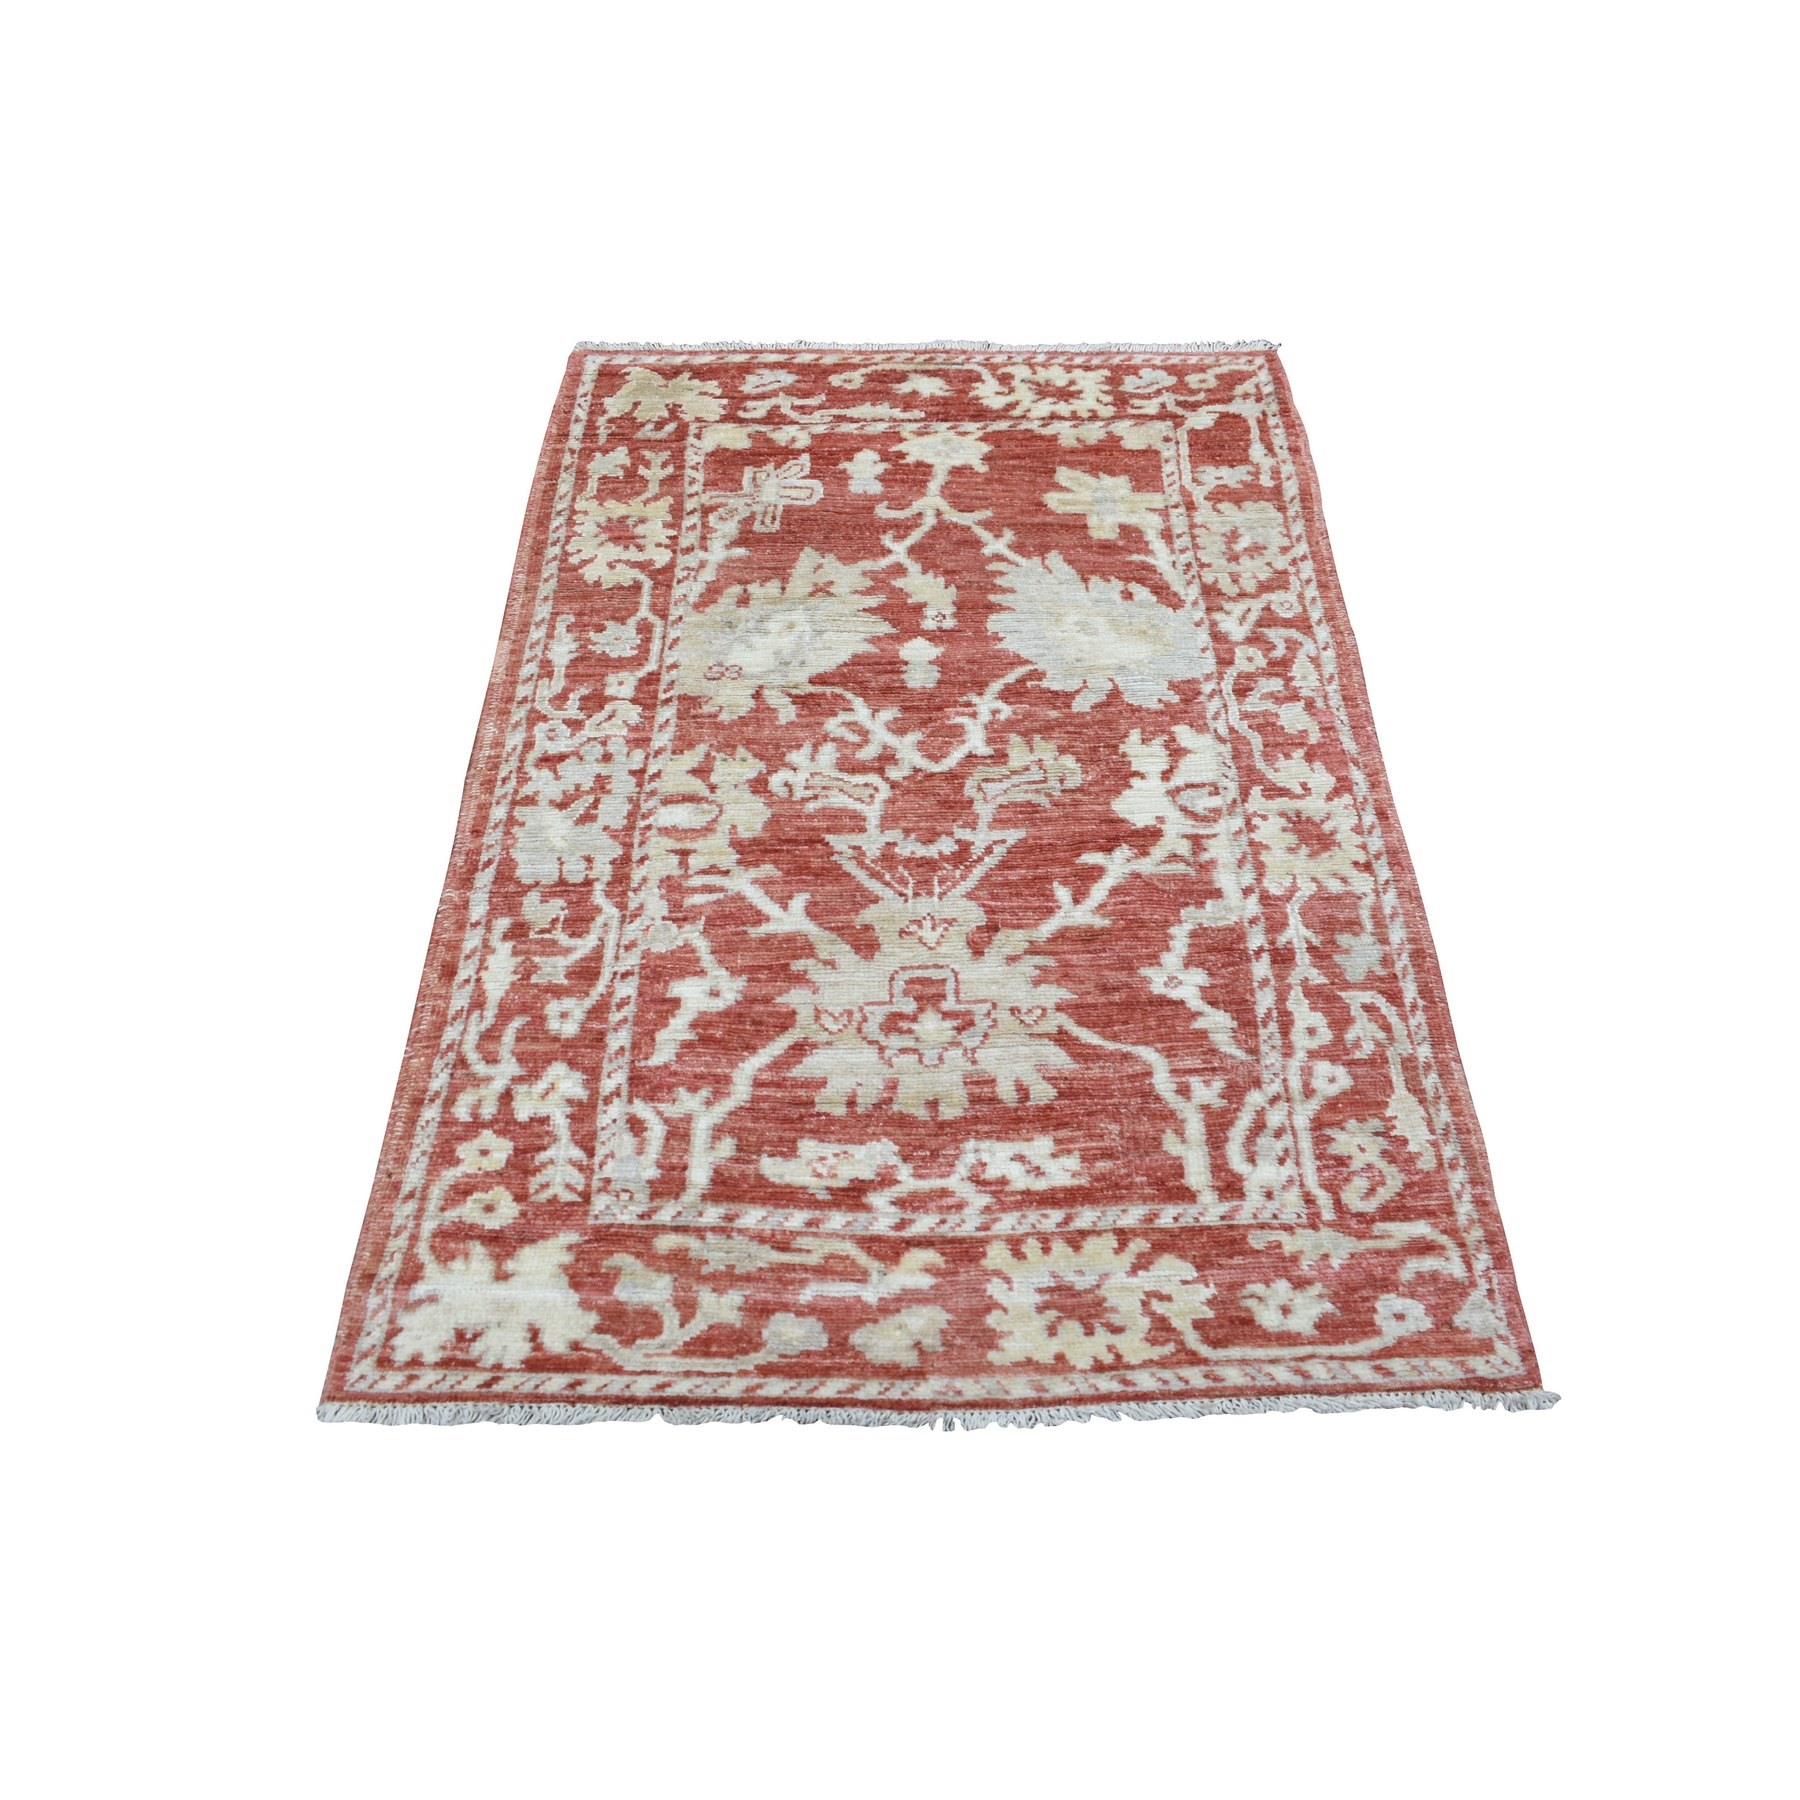 3'2"x5' Angora Ushak with Bold Eye-Catching Pattern Extra Soft Wool Hand Woven Rich Red Oriental Rug 